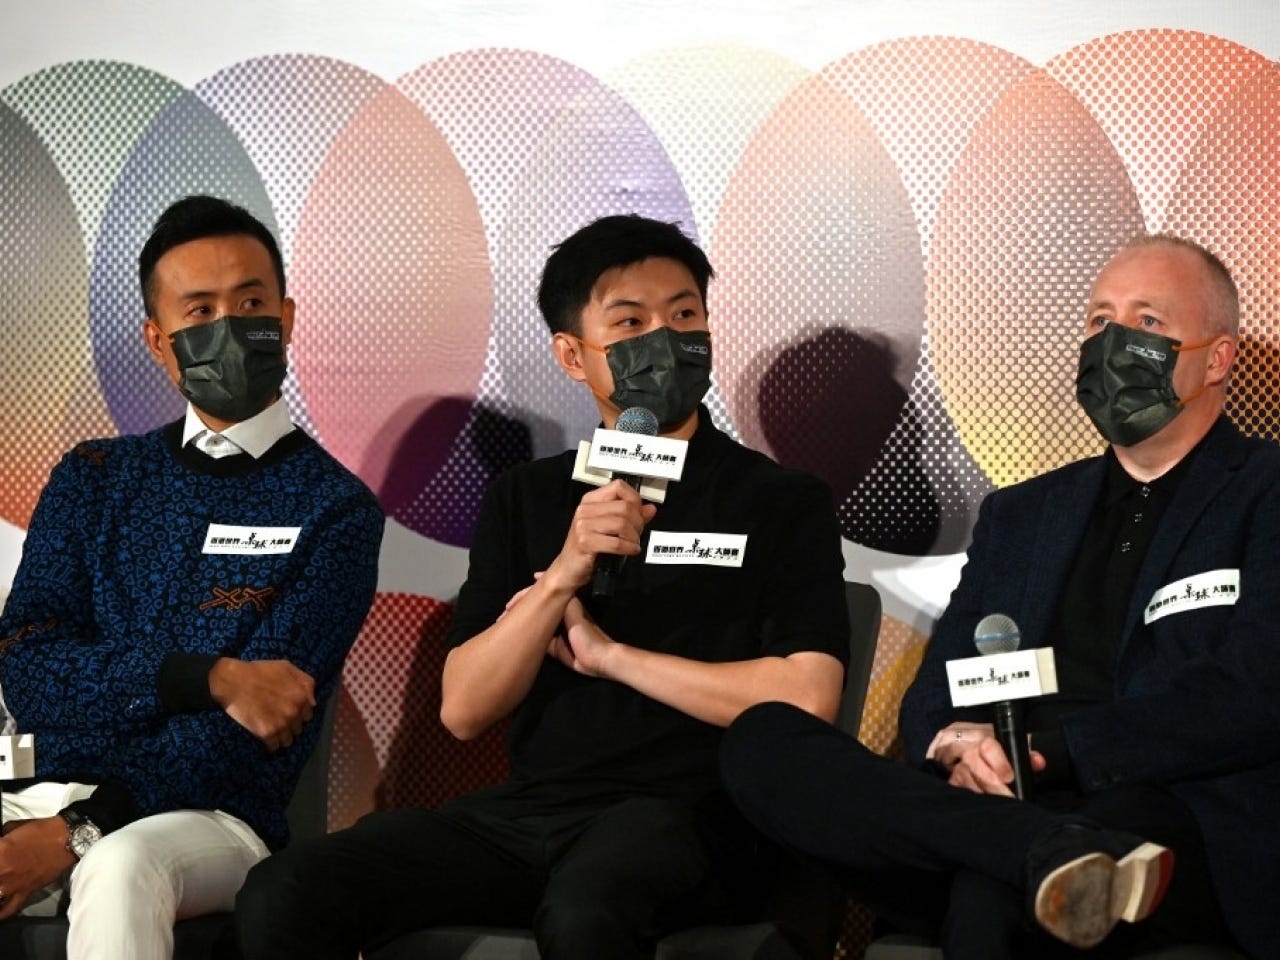 Hours before testing positive, Zhao Xintong, centre, appeared alongside fellow Hong Kong Masters players at a press conference. File photo: AFP